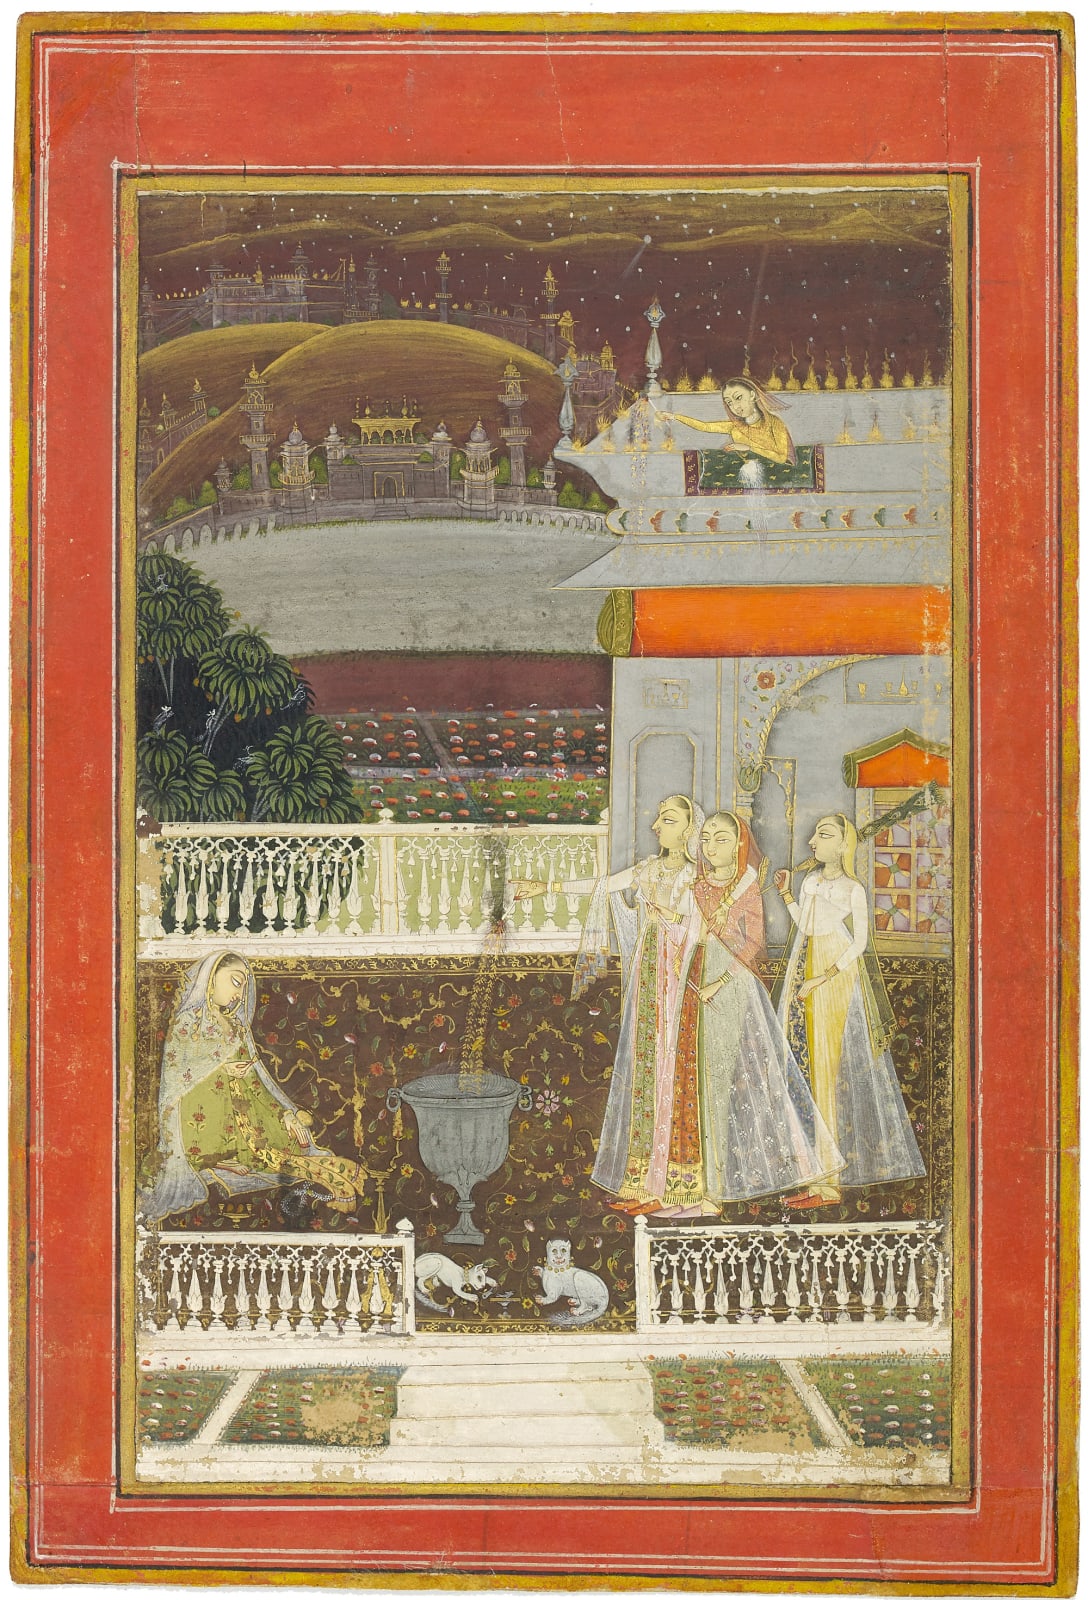 The Night of Shab-barat - Ladies with Fireworks on a Terrace, By the artist Mola Bagas, Bikaner, late 18th century